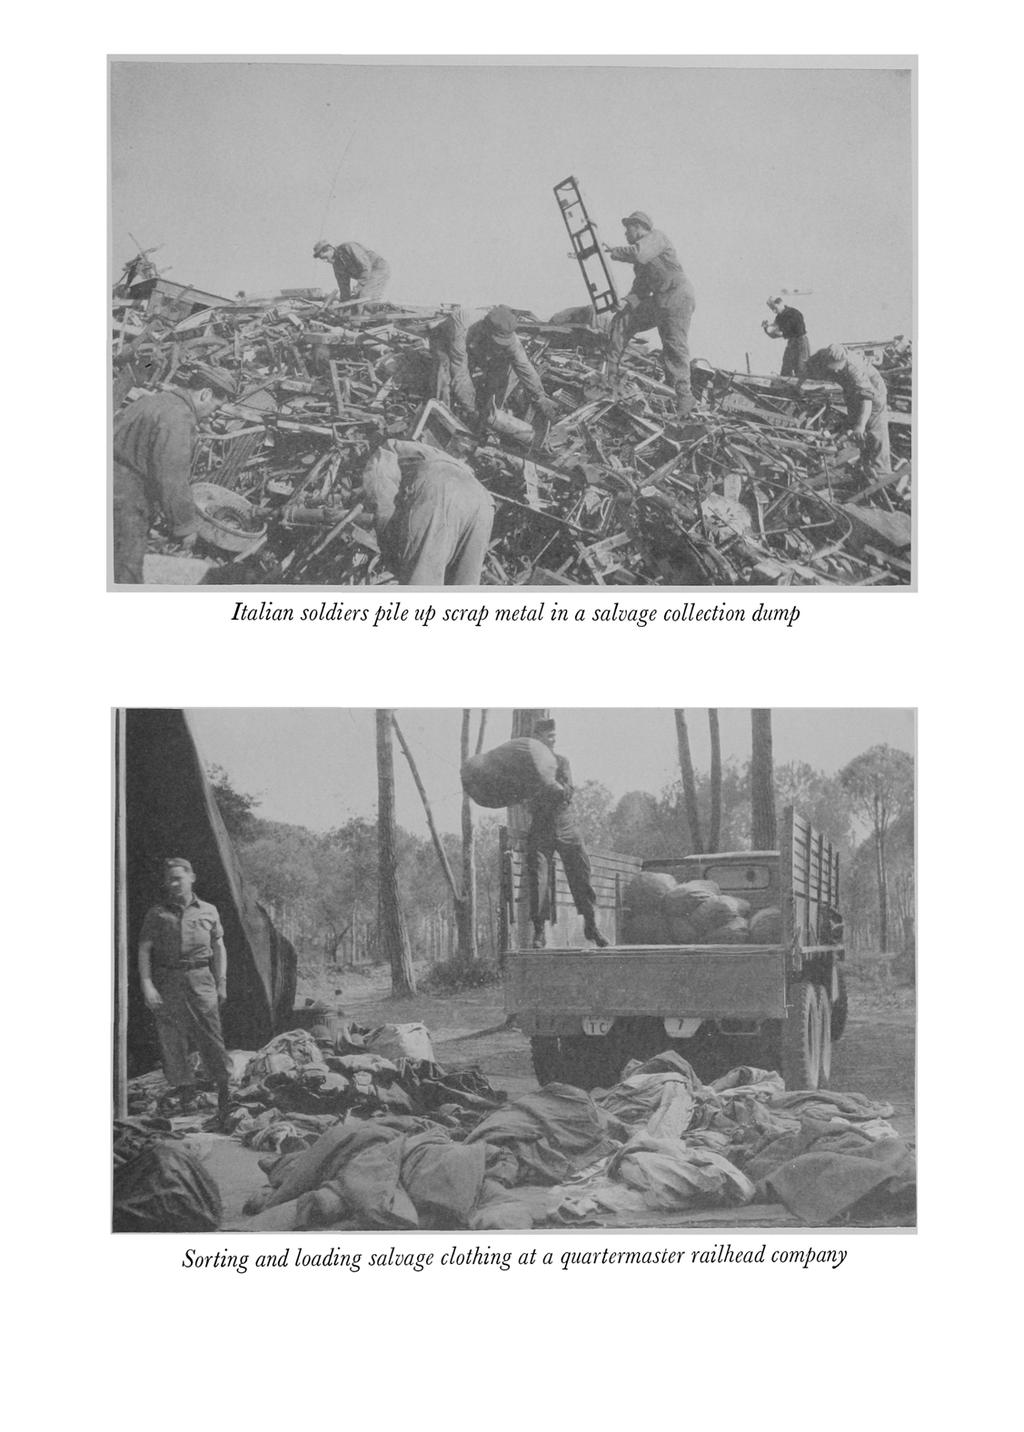 Italian soldiers pile up scrap metal in a salvage collection dump